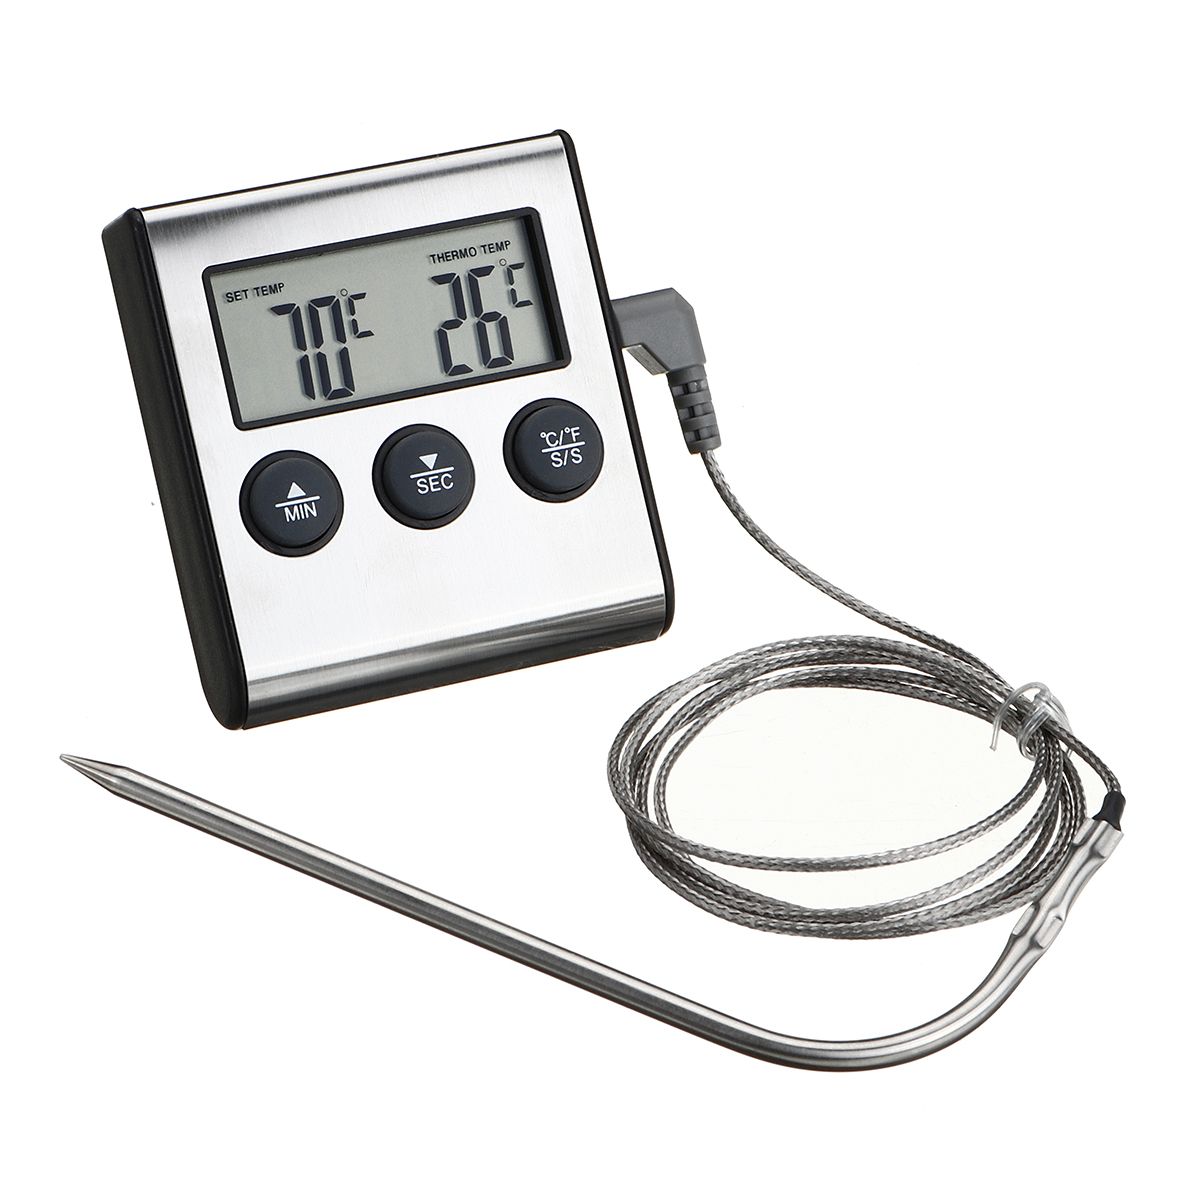 Digital-Thermometer-Kitchen-Food-Cooking-Meat-BBQ-Probe-Thermometer-Cooking-Tools-1579313